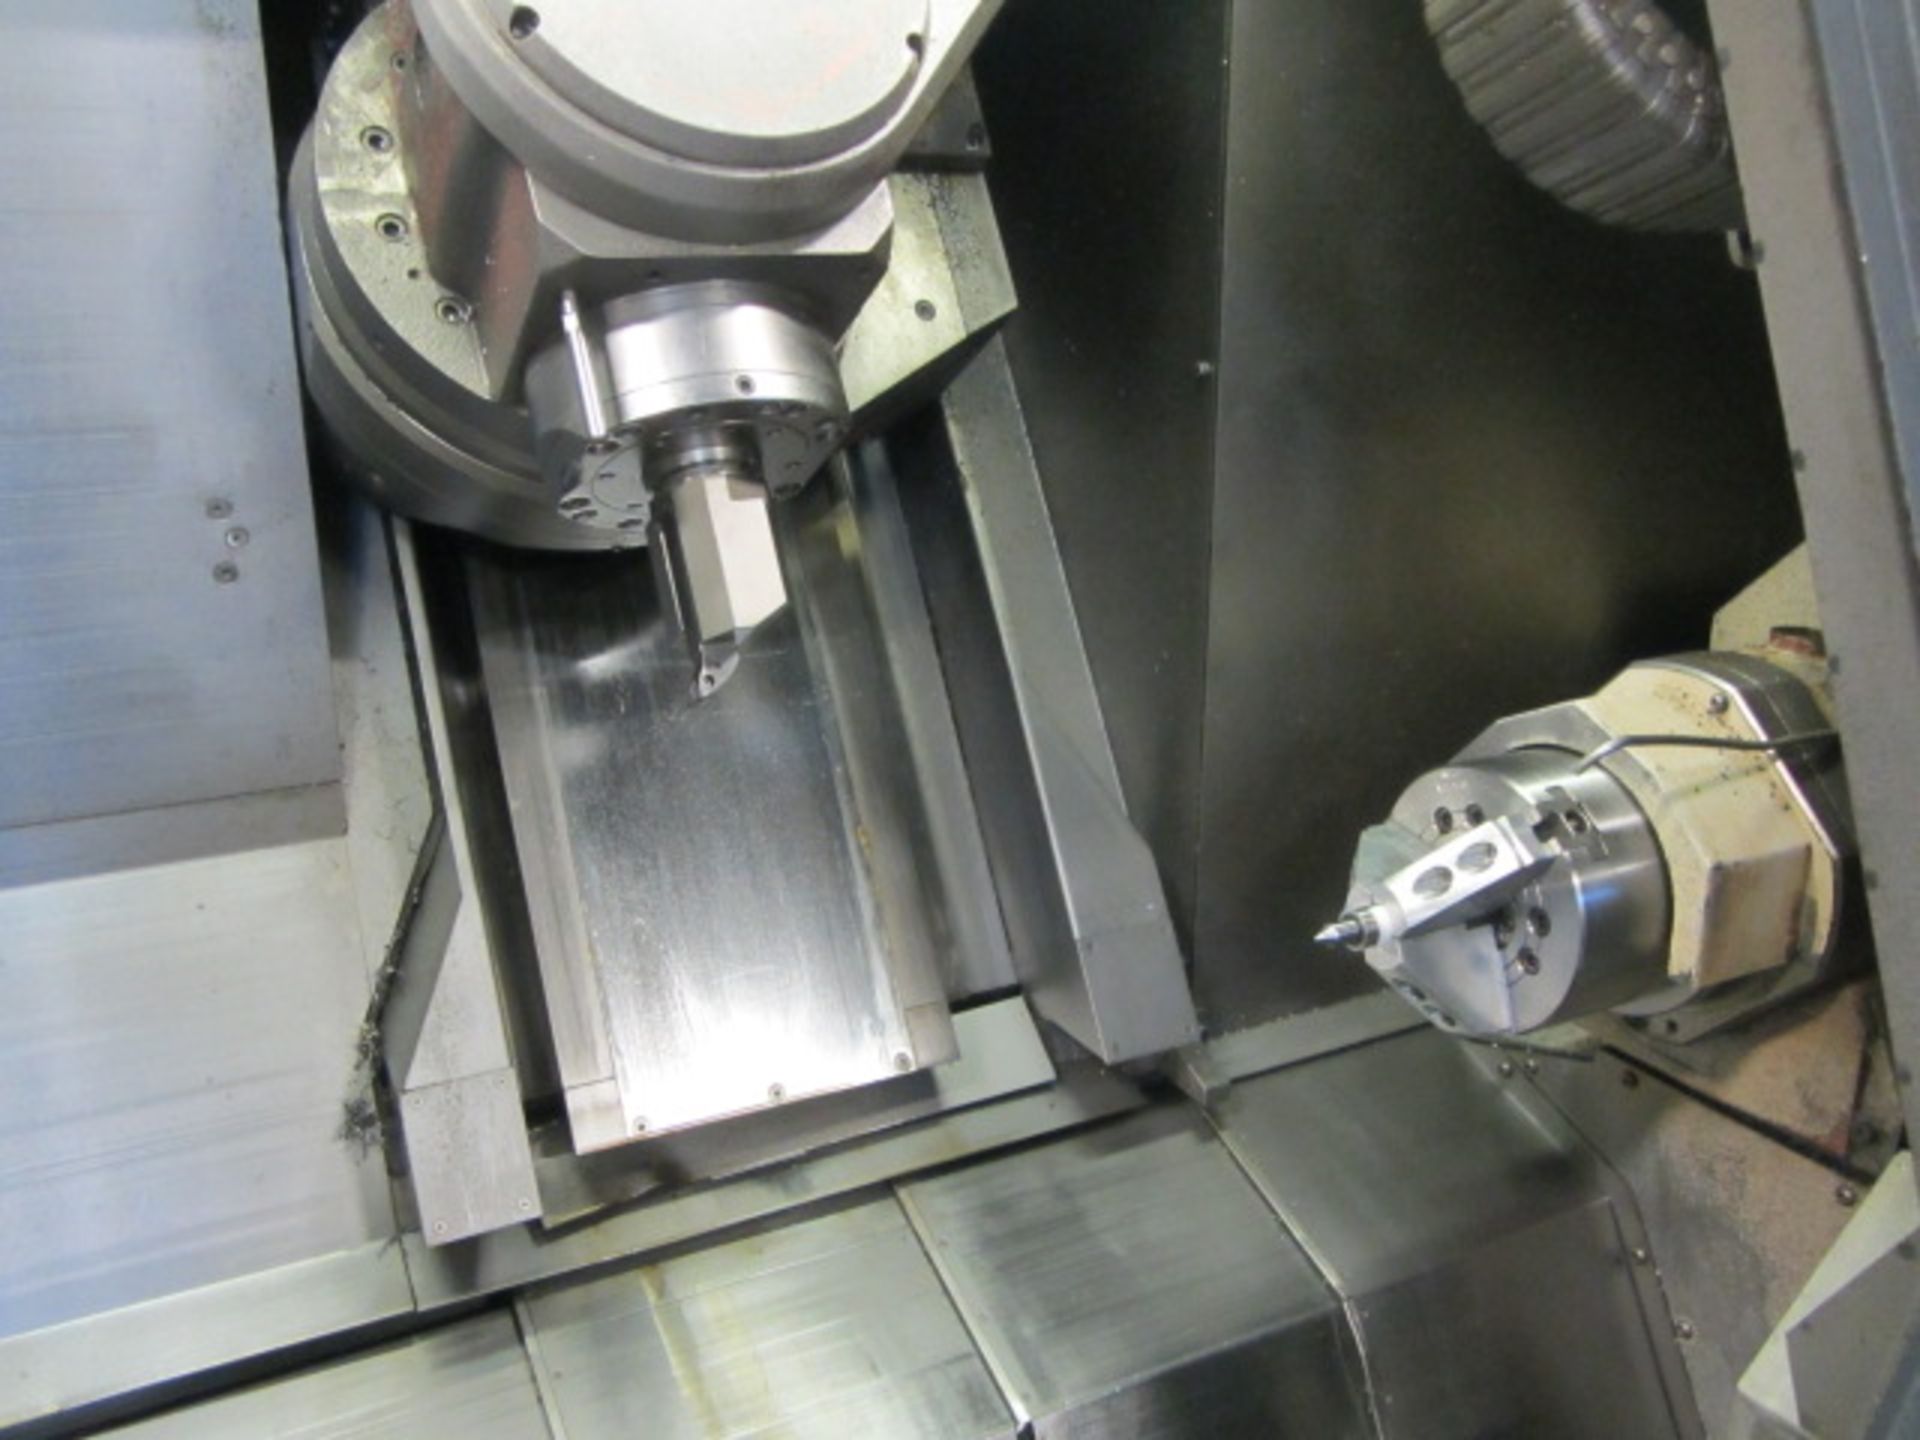 Mazak Integrex 200SY CNC Turning Center with Sub-Spindle, Milling & Y-Axis, 8'' Chuck on Main - Image 4 of 9